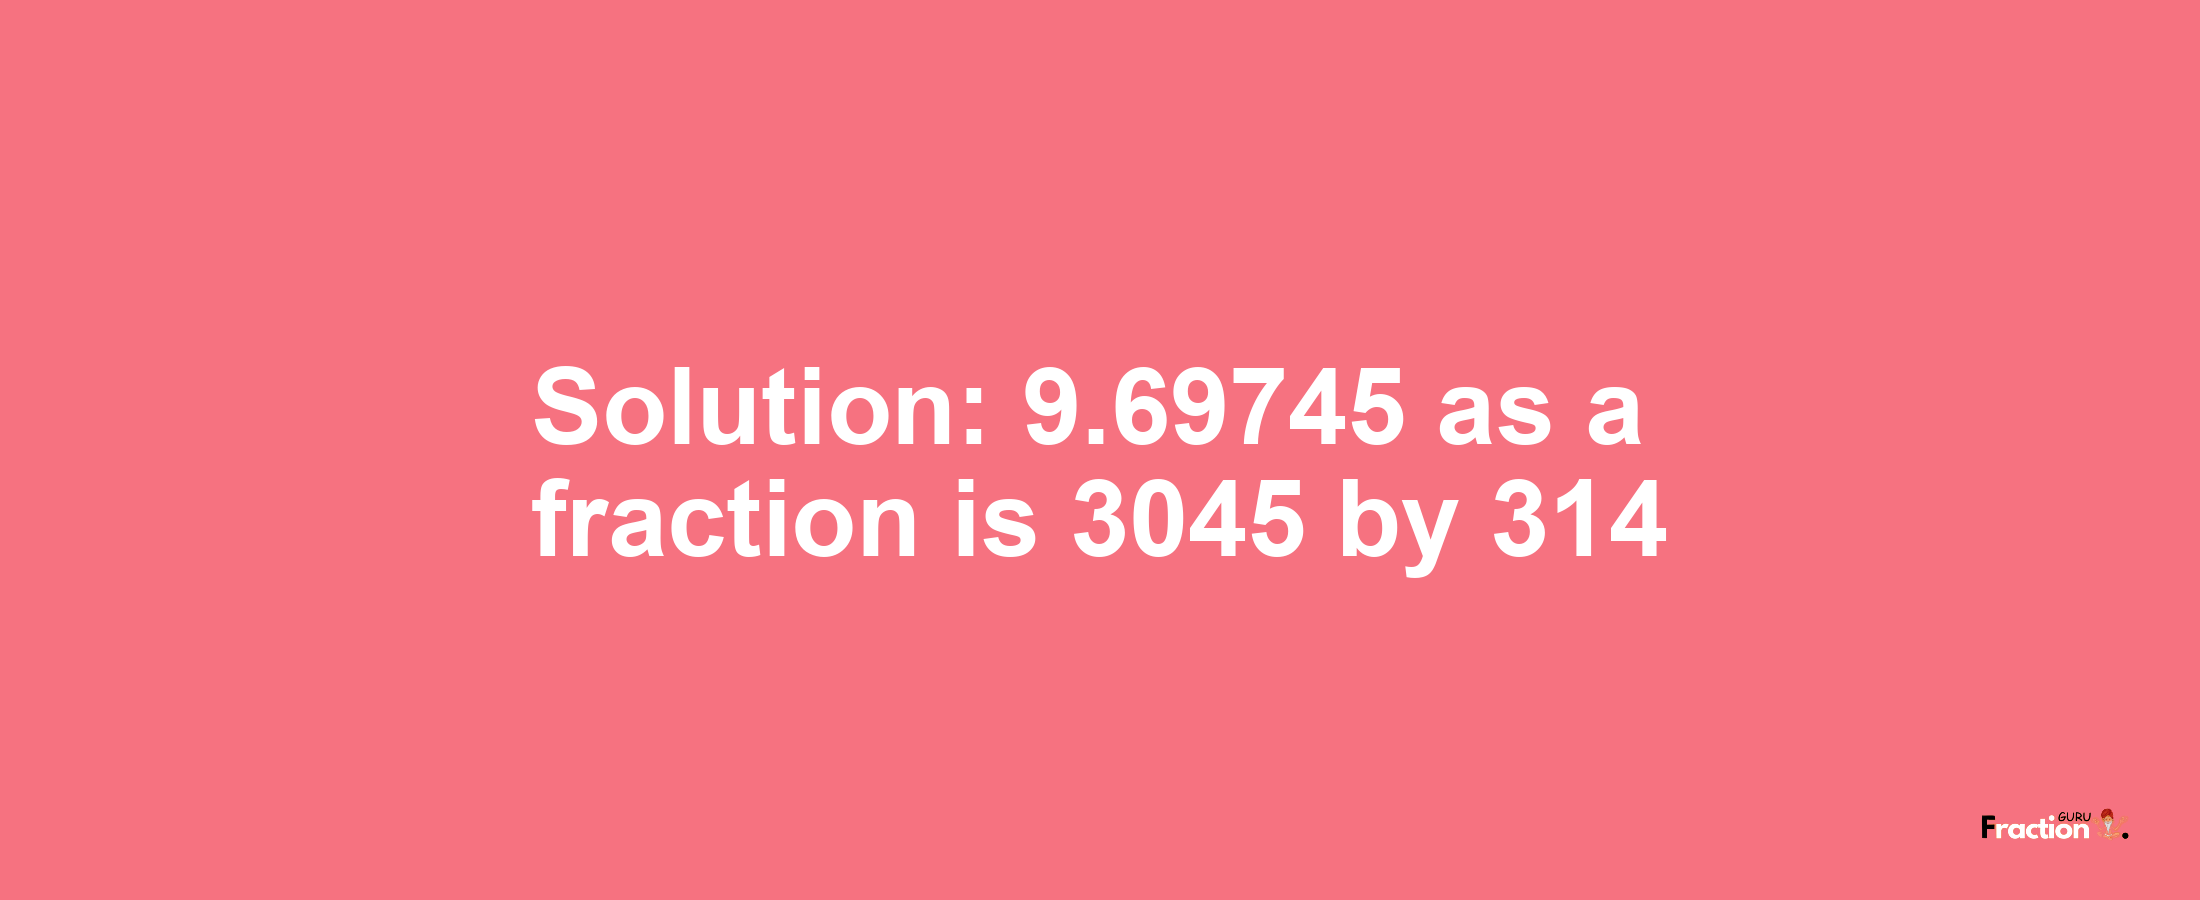 Solution:9.69745 as a fraction is 3045/314